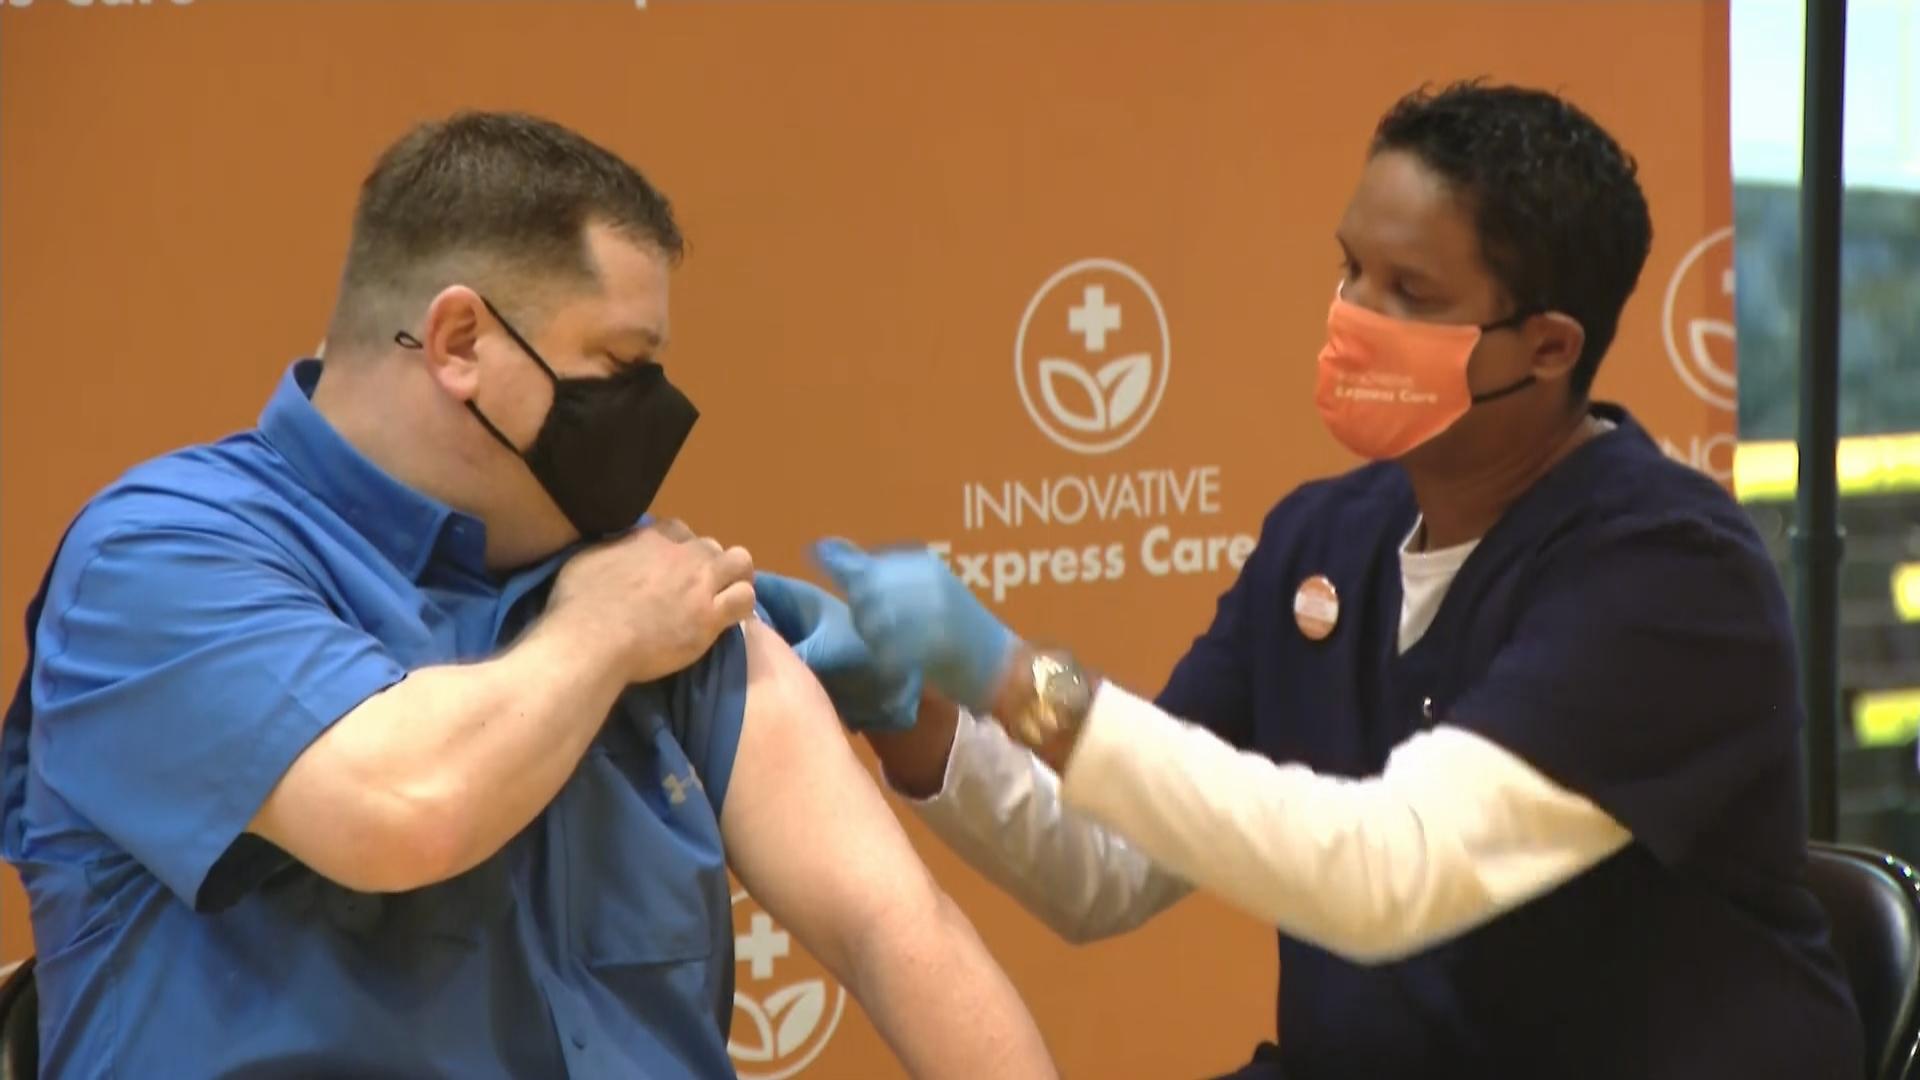 Jeff Lorenz, a teacher at Roosevelt High School, receives a COVID-19 vaccination at his school on March 17, 2021. (WTTW News)